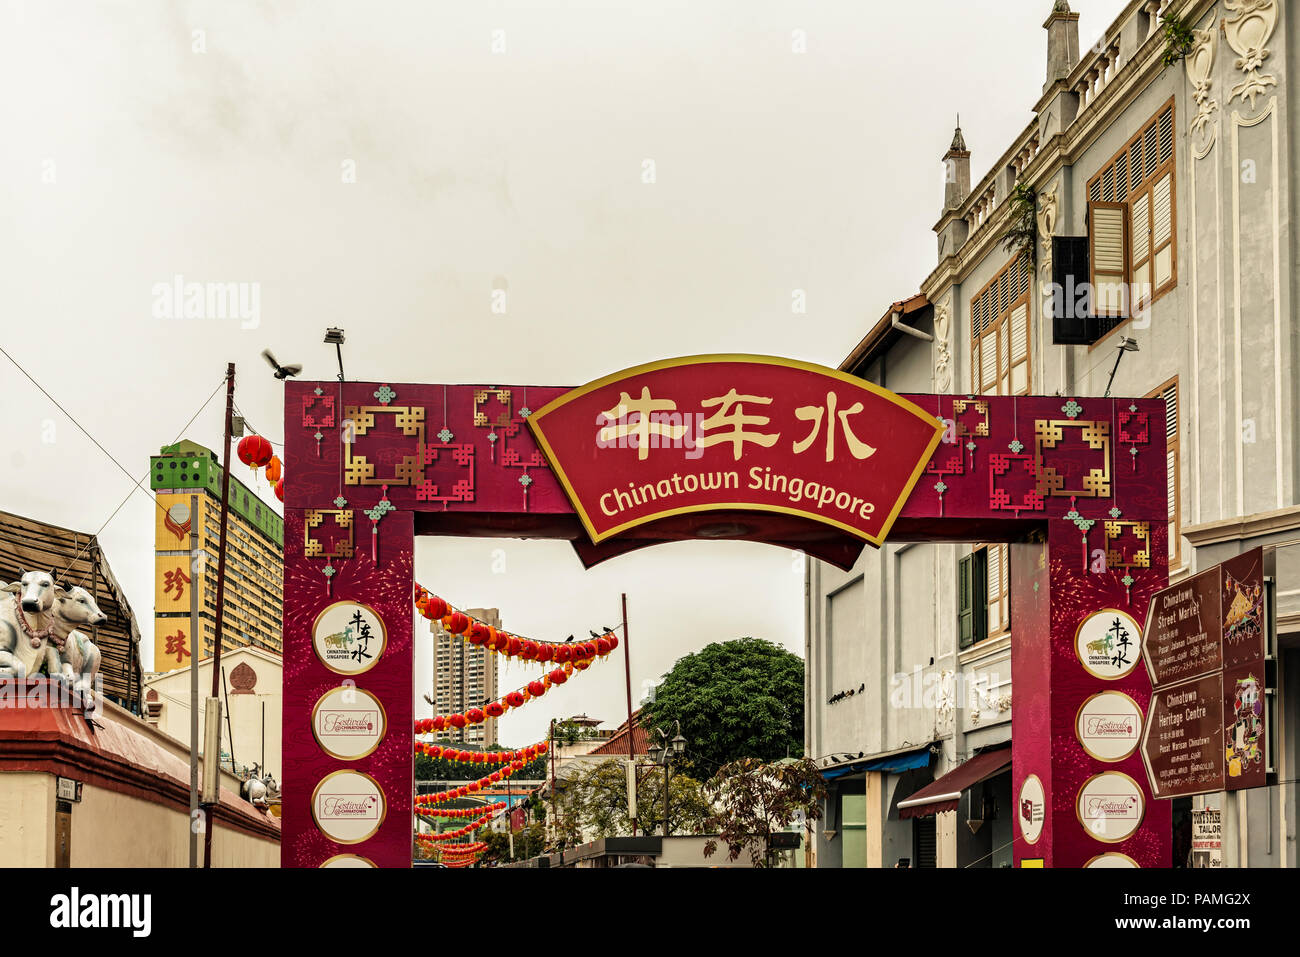 Singapore - January 12, 2018: View at the old colonial houses in the part of Singapore called Chinatown. Stock Photo